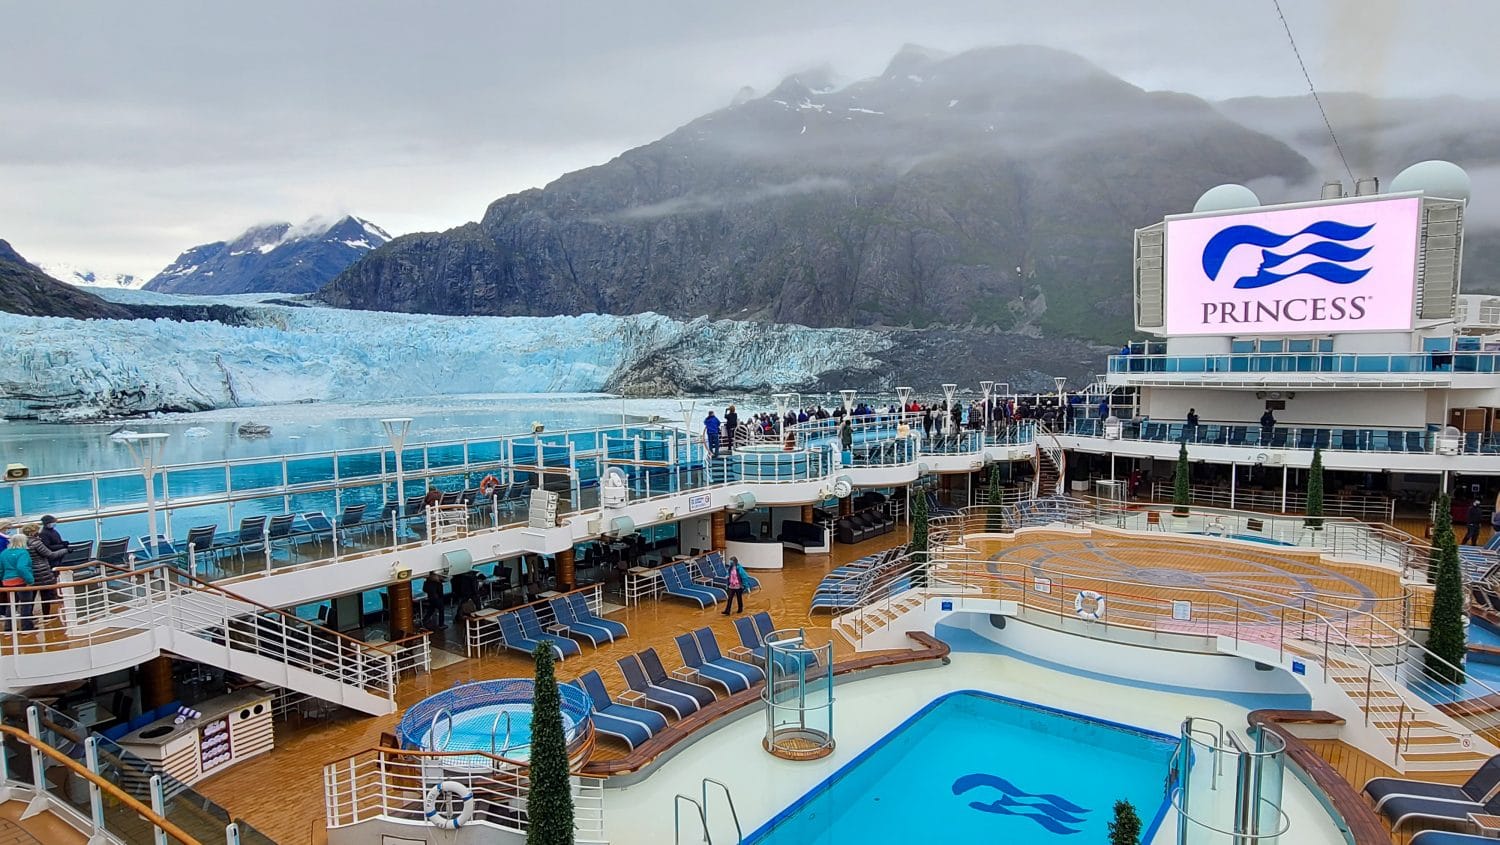 Princess Cruises Alaska Review What I Loved About the Cruise and Ship